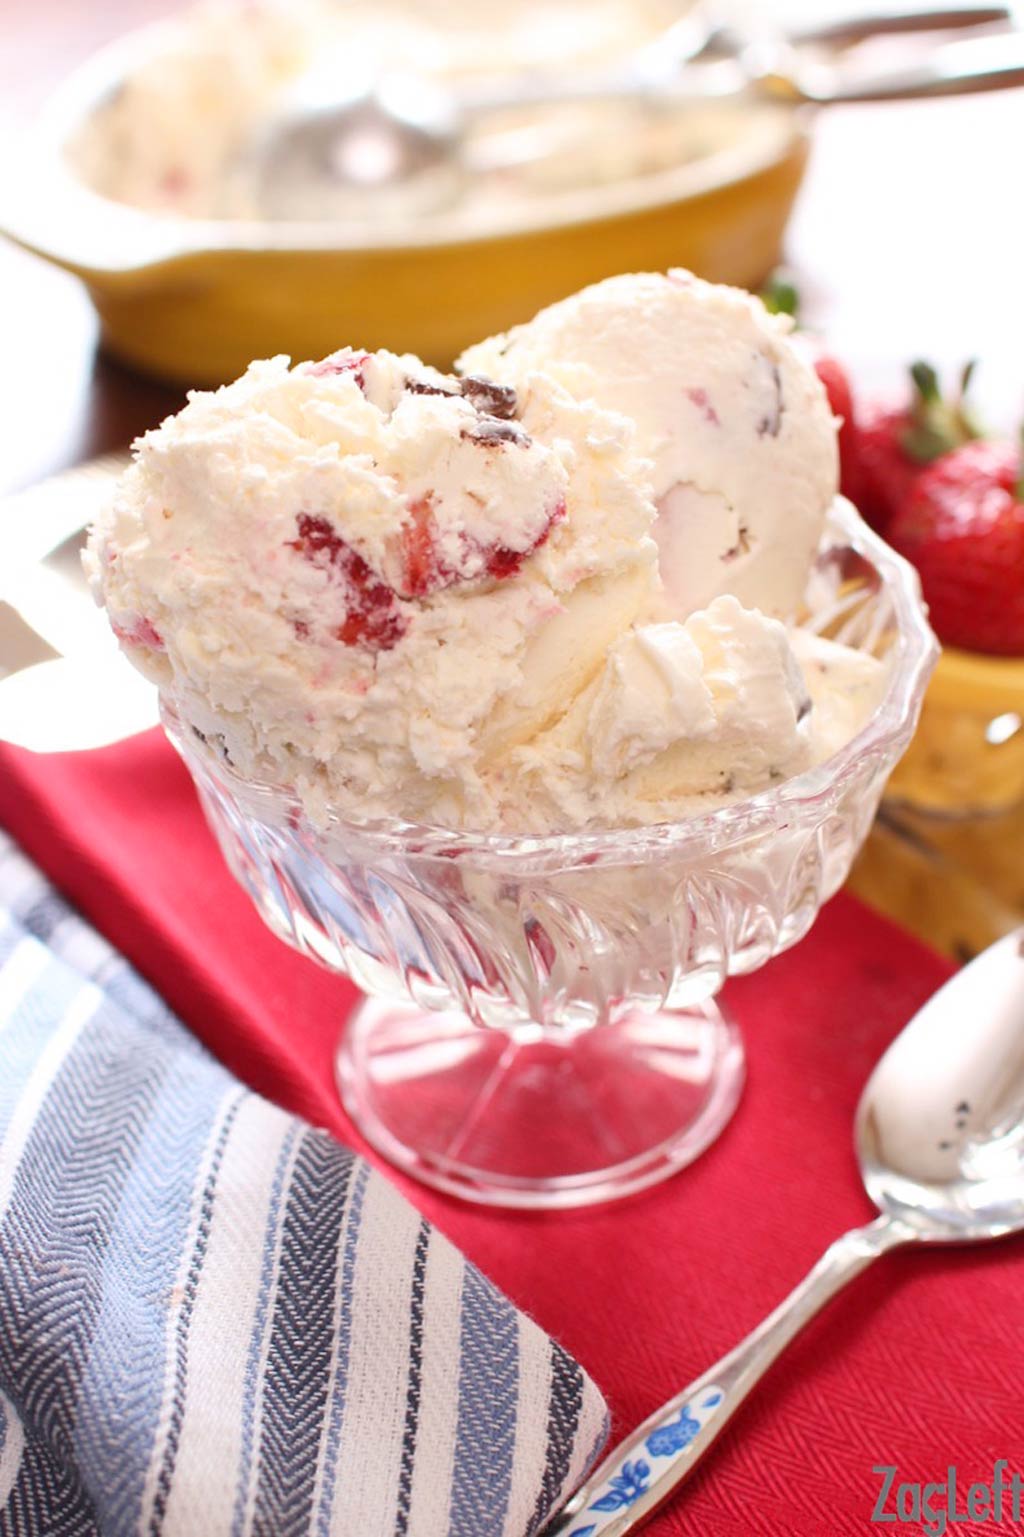 Strawberry ice cream in a dessert glass on a red cloth napkin next to a spoon 